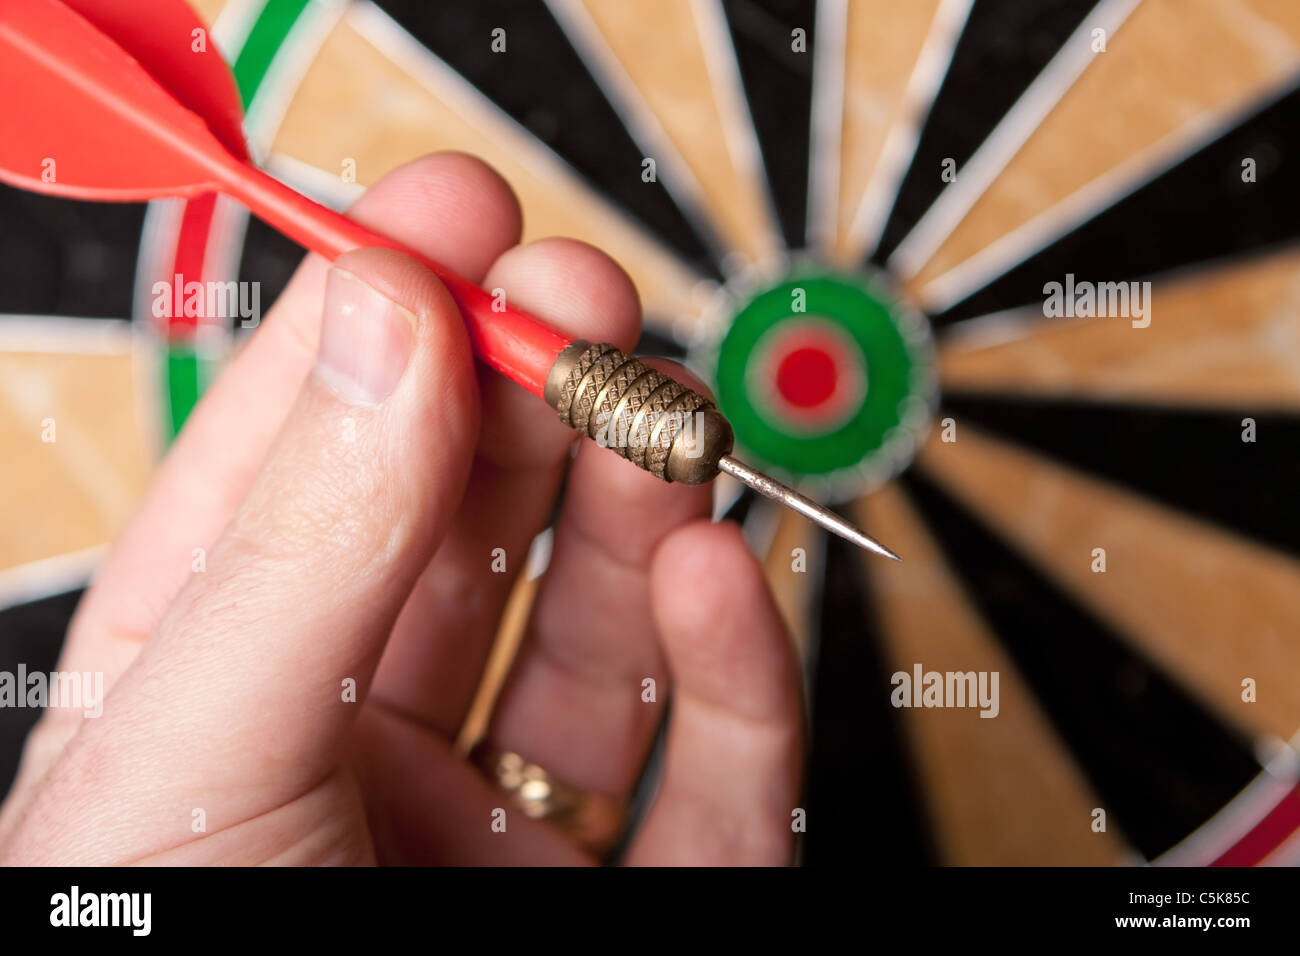 A hand holding a dart getting ready to aim at the dartboard. Shallow depth of field. Stock Photo